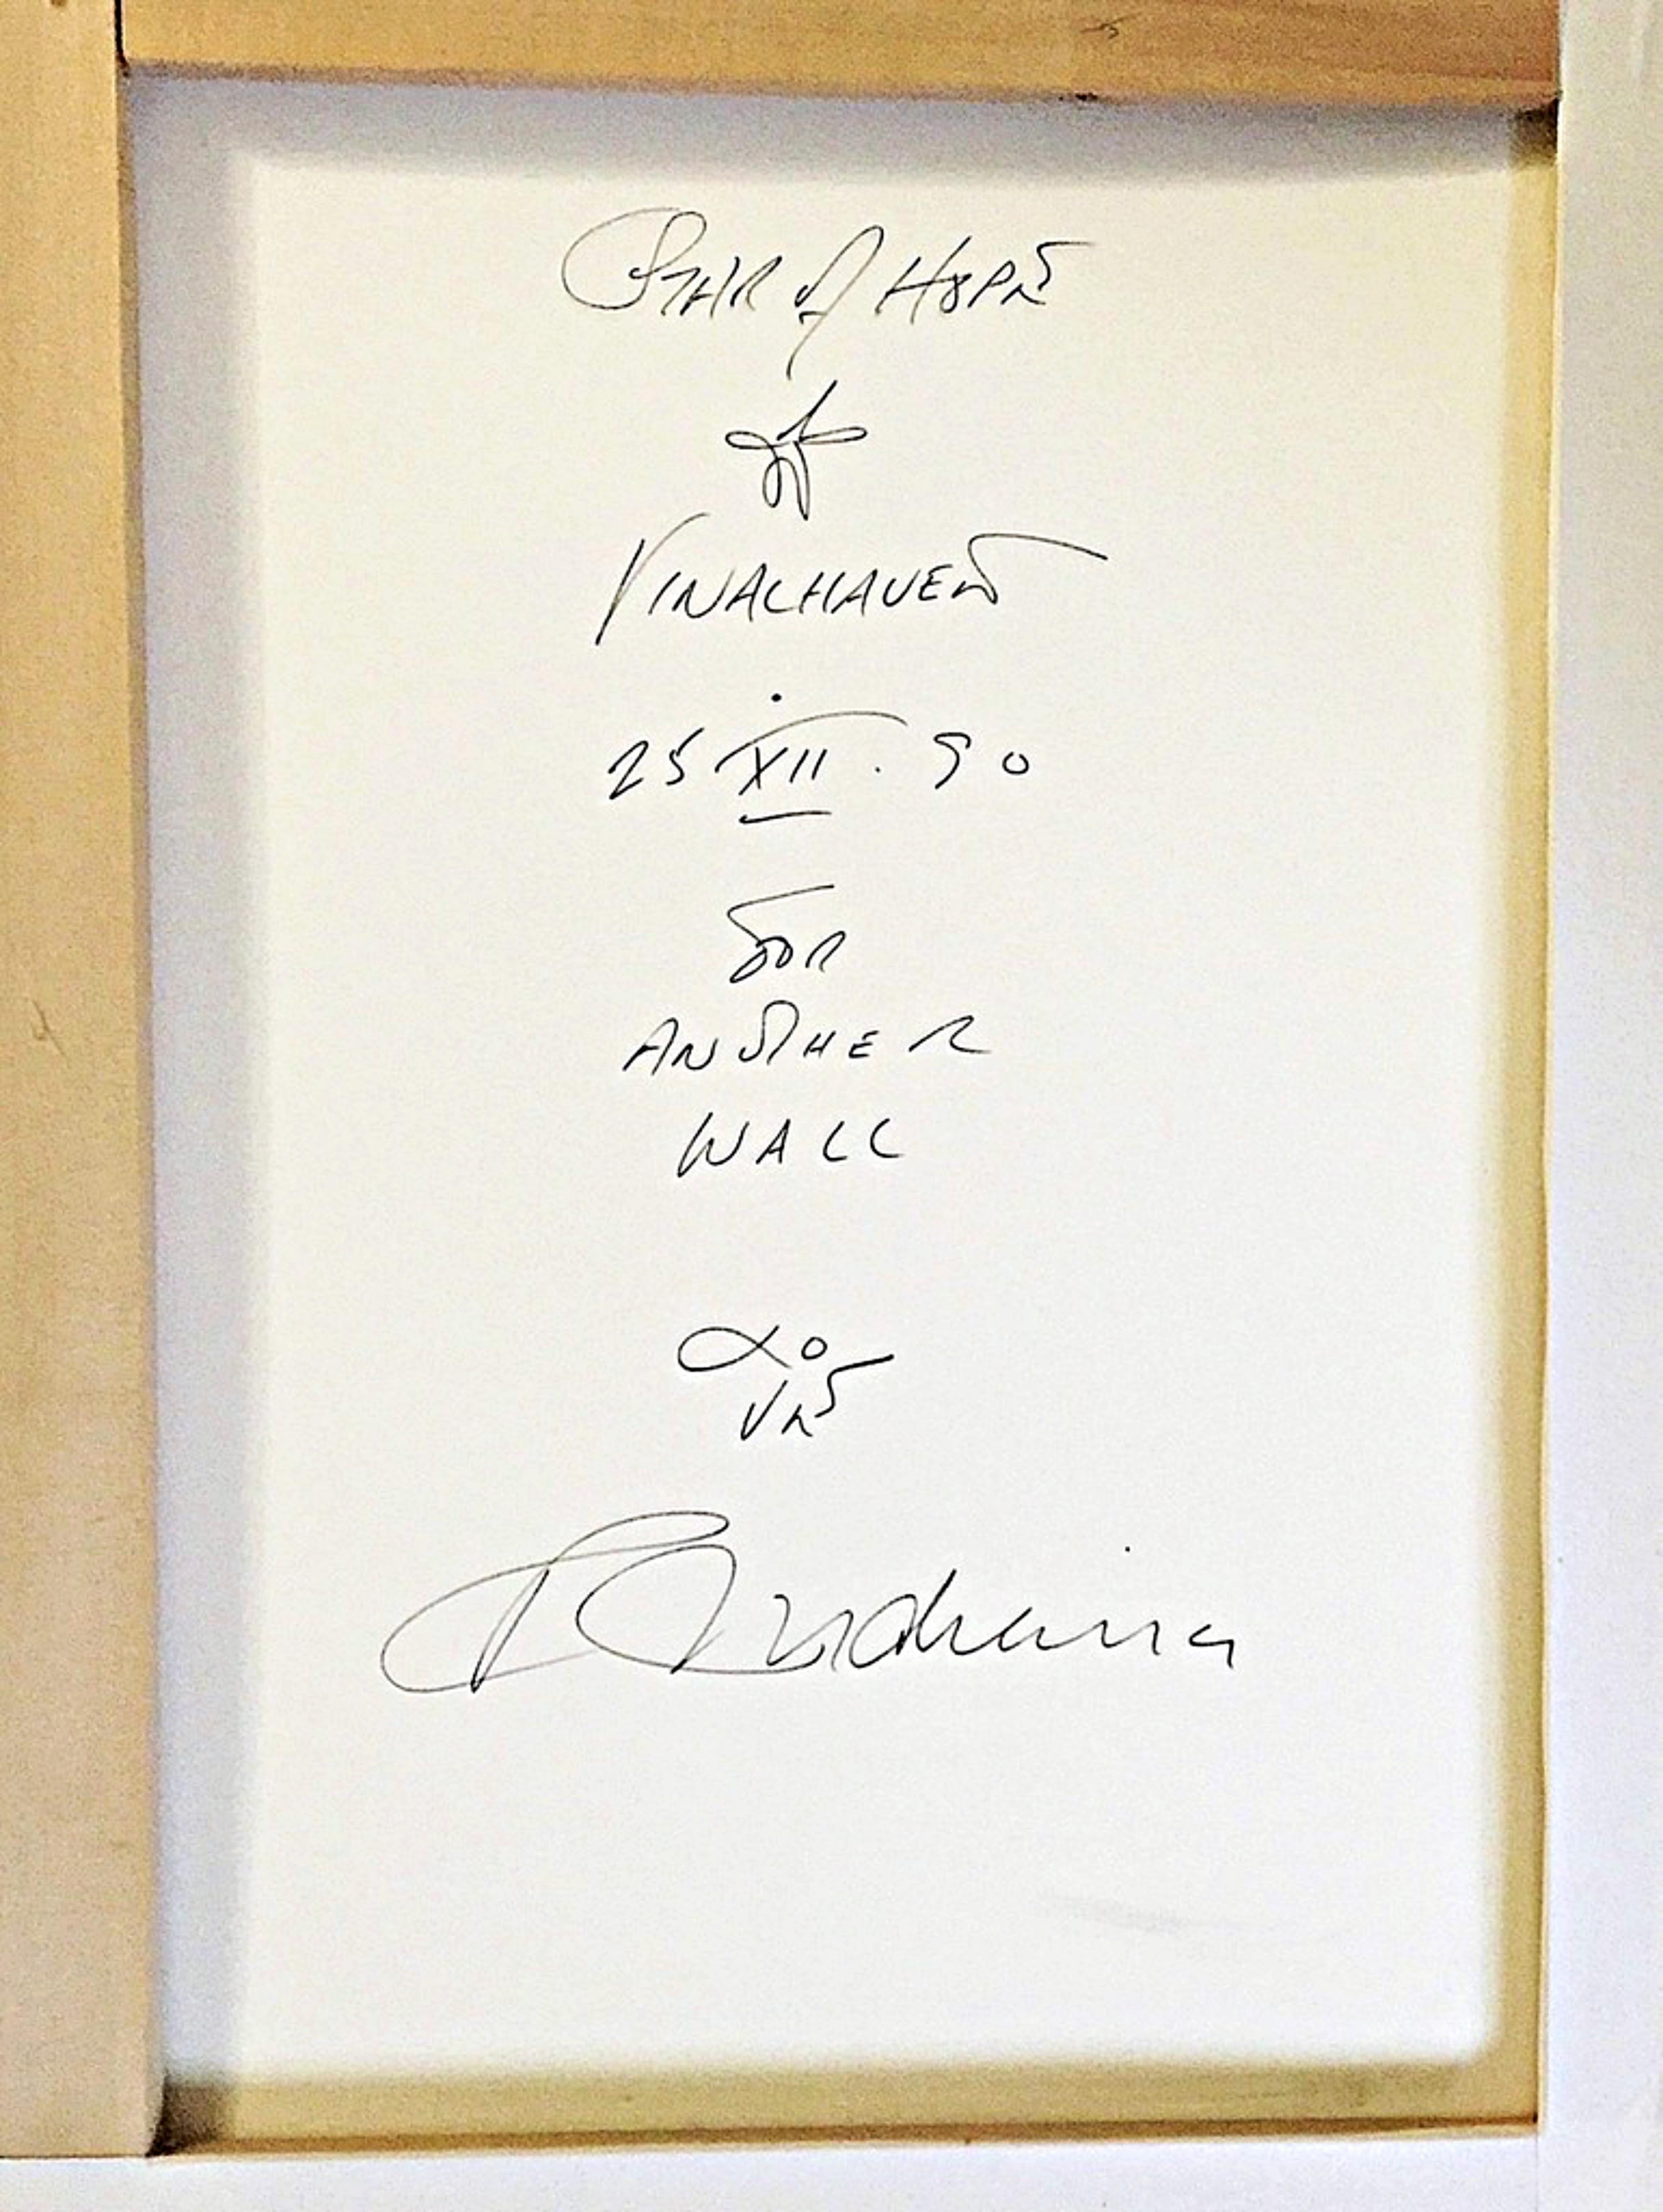 Wall to Wall (signed twice with inscription and drawing) - Art by Robert Indiana